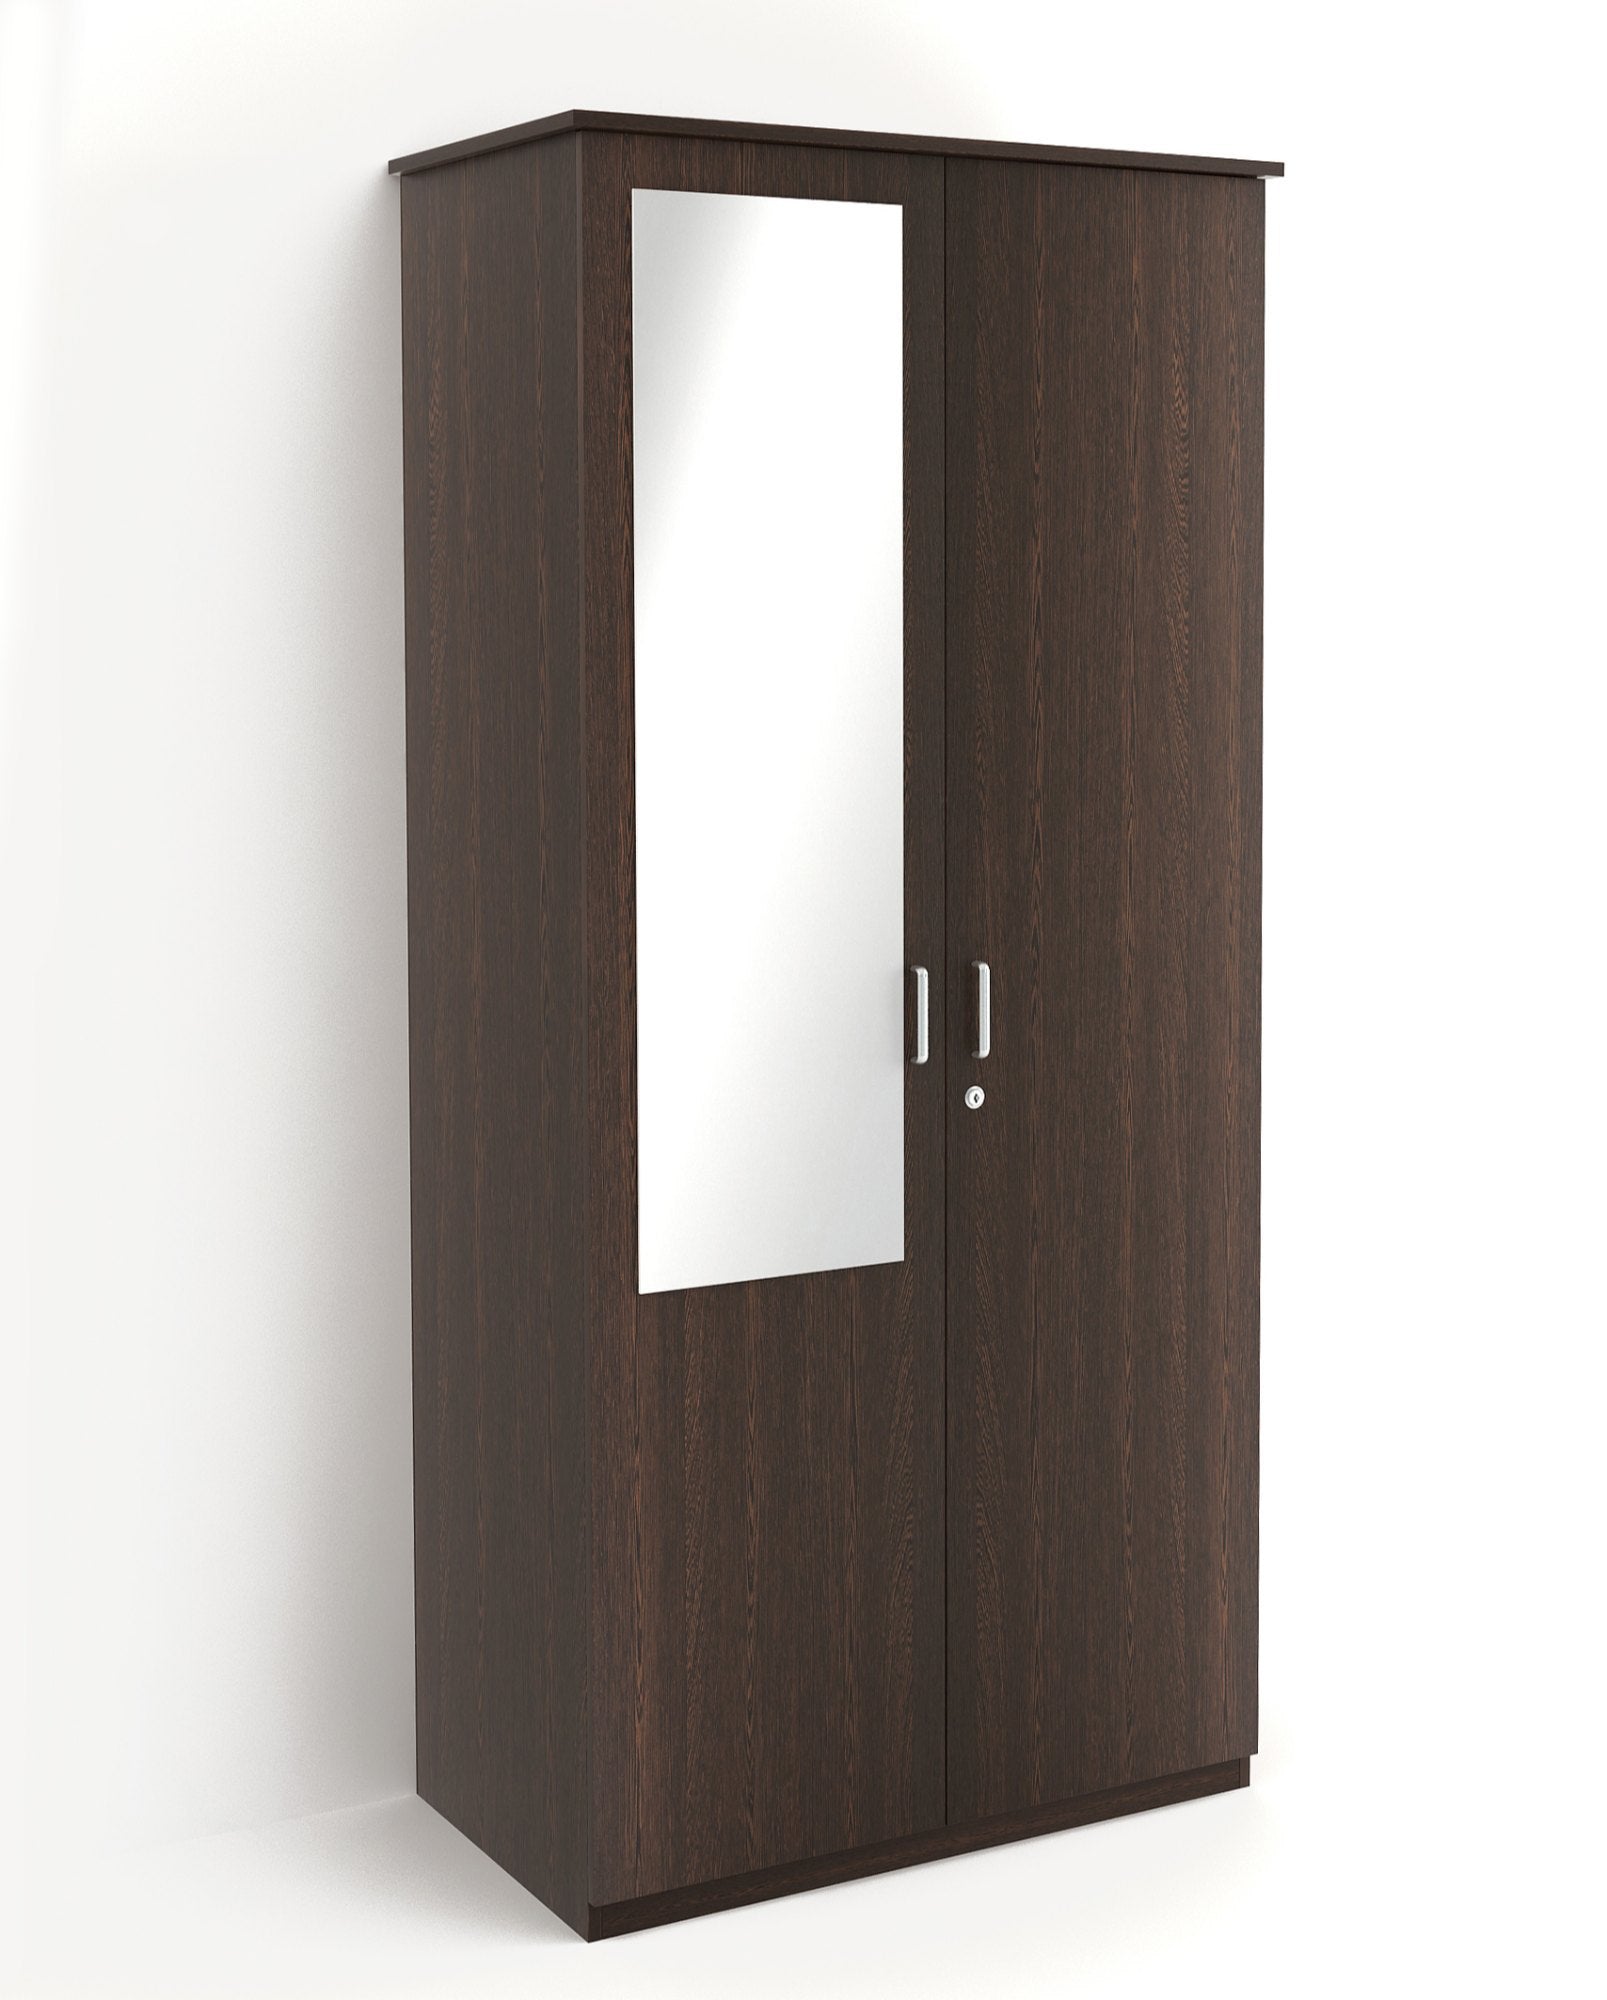 Wardrobe Adrie Double Doors Wardrobe with Full Length Mirror and Drawer, (Wenge)